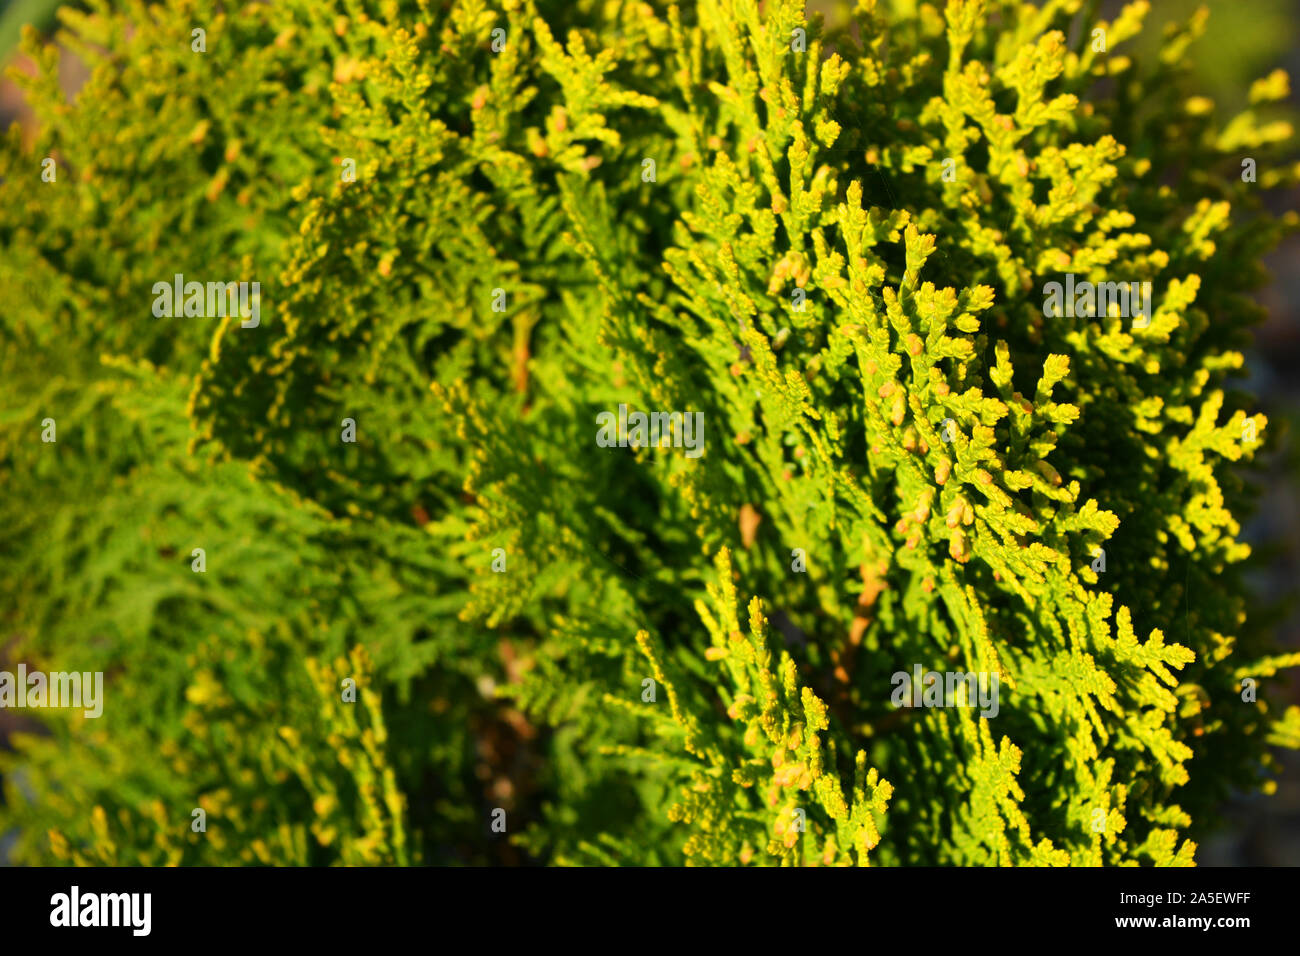 Branches and scaly leaves of a cypress plant. Thuja species orientalis Aurea Nana, arborvitaes, thujas or cedars in the light of the bright autumn sun Stock Photo